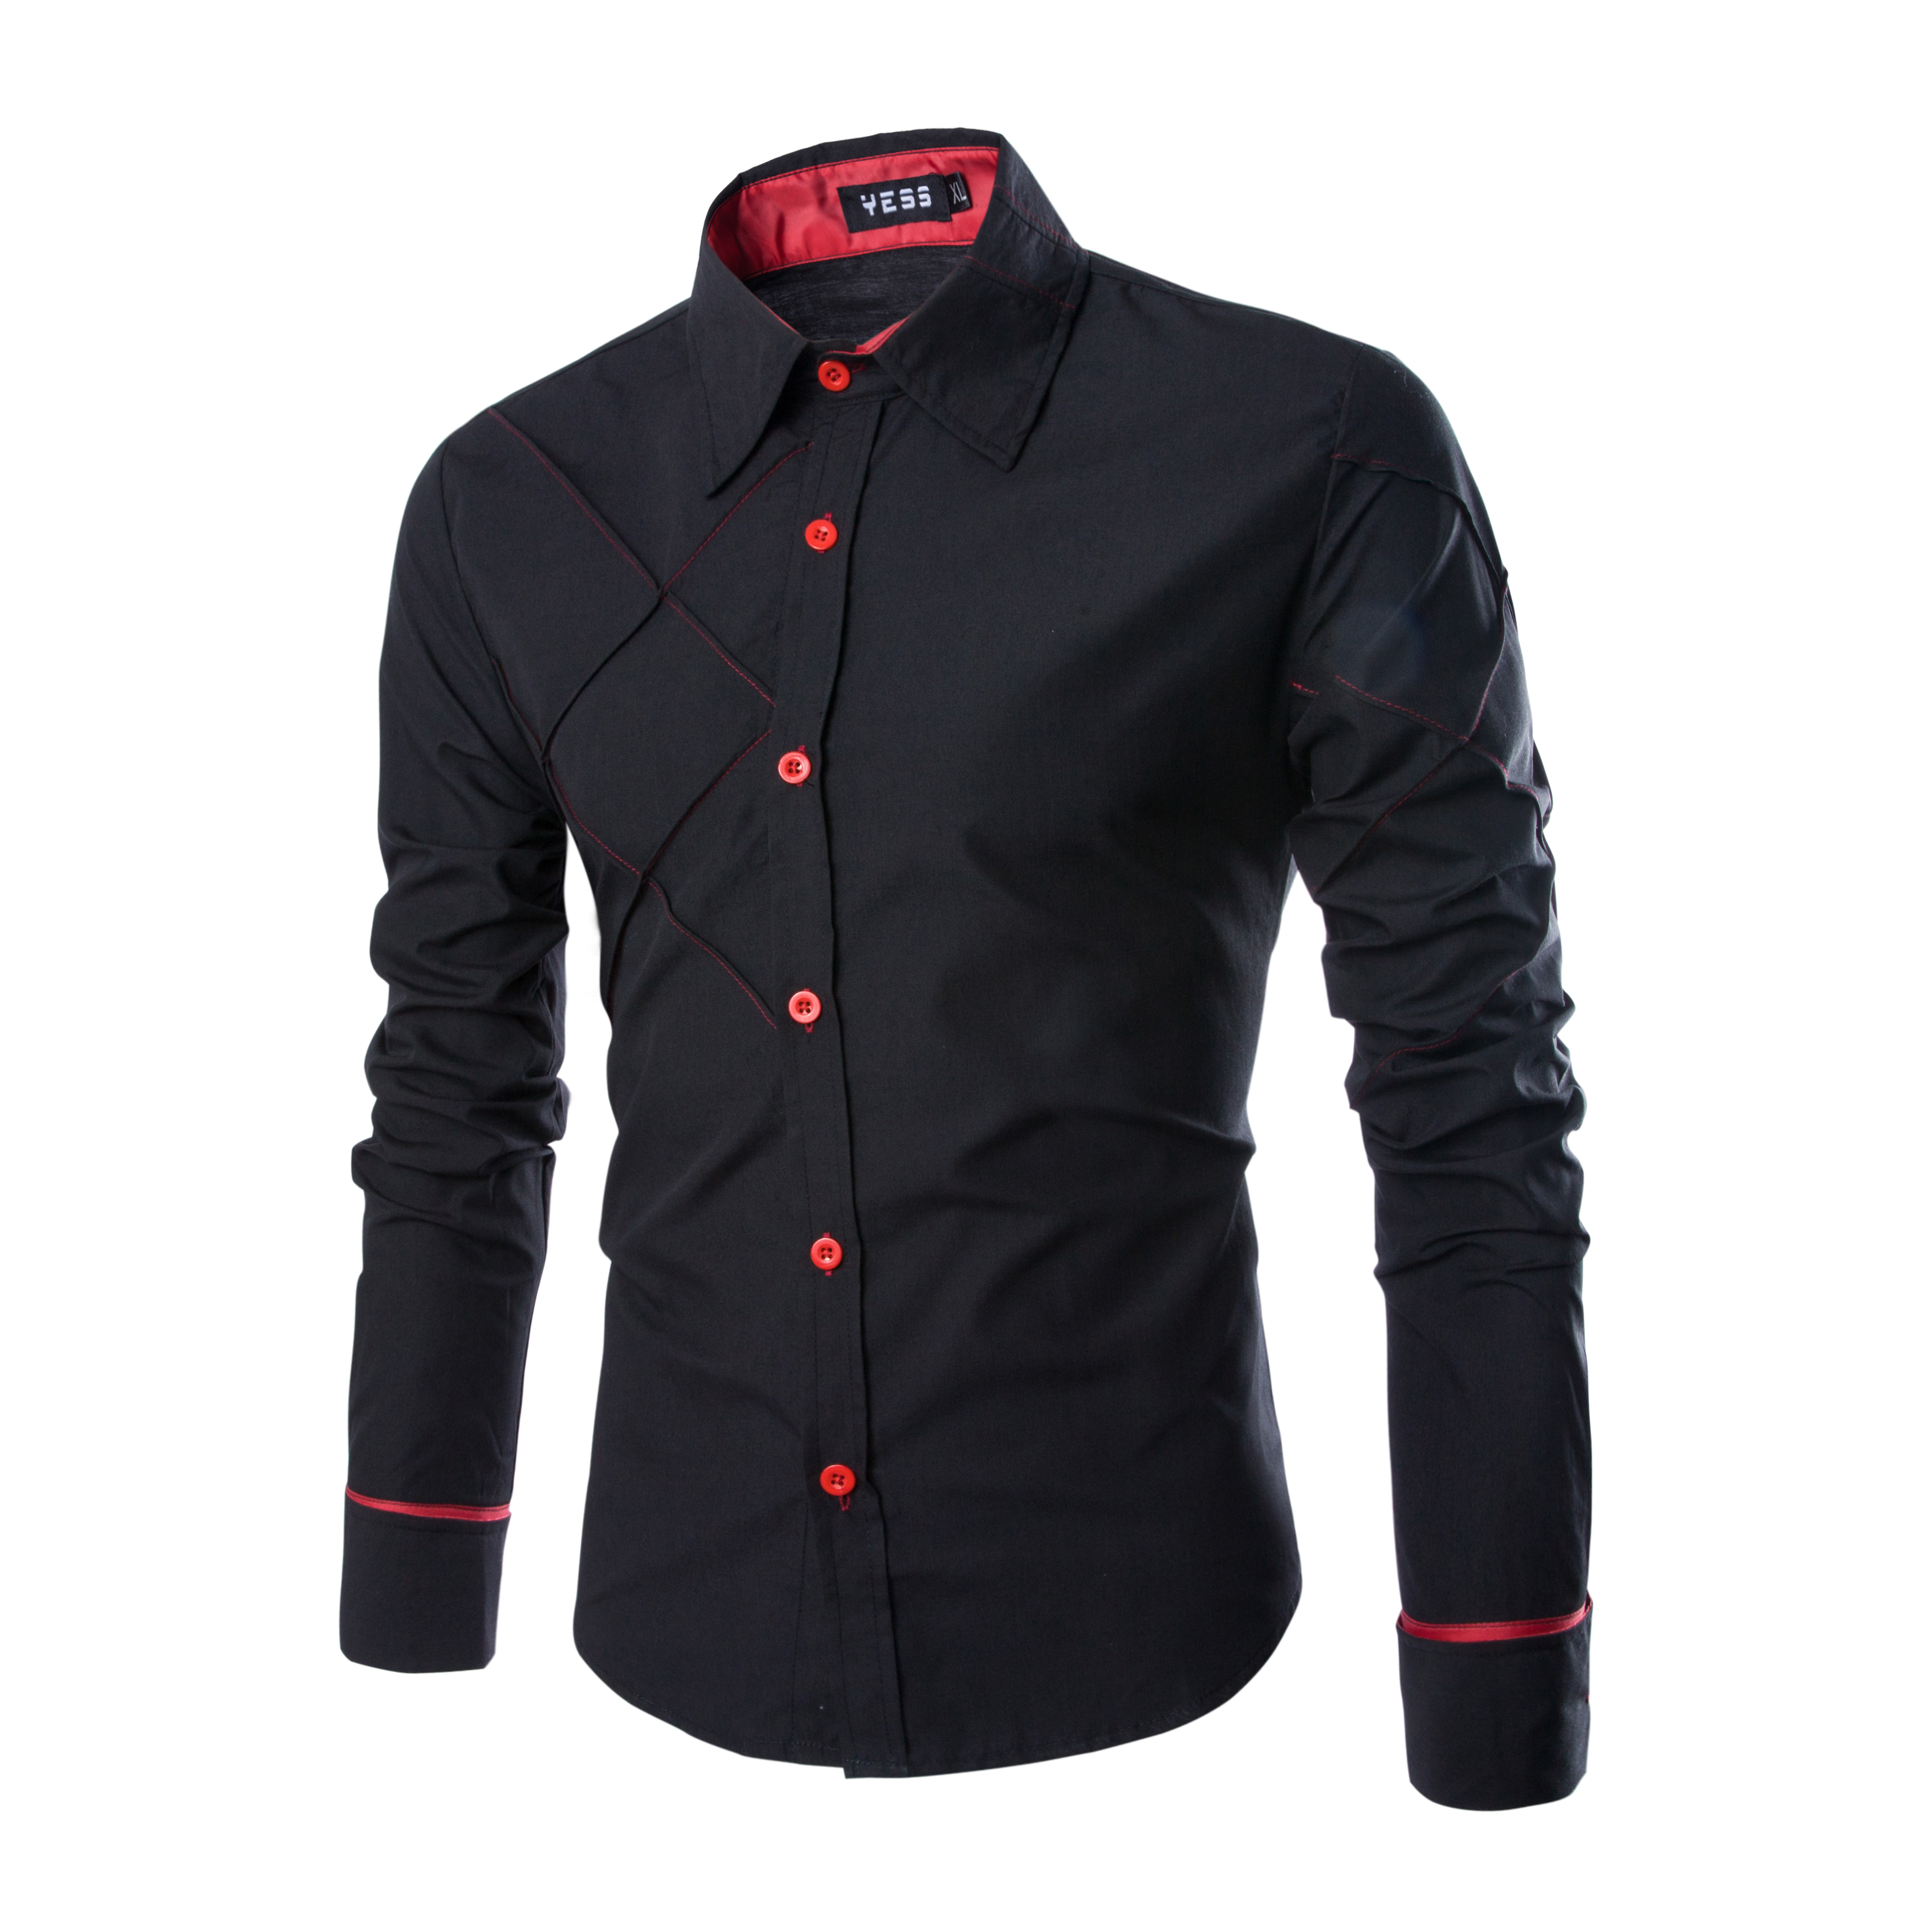 New Men'S Long-Sleeved Shirt Casual Plaid Design A Unique Personality Personalized Shirt